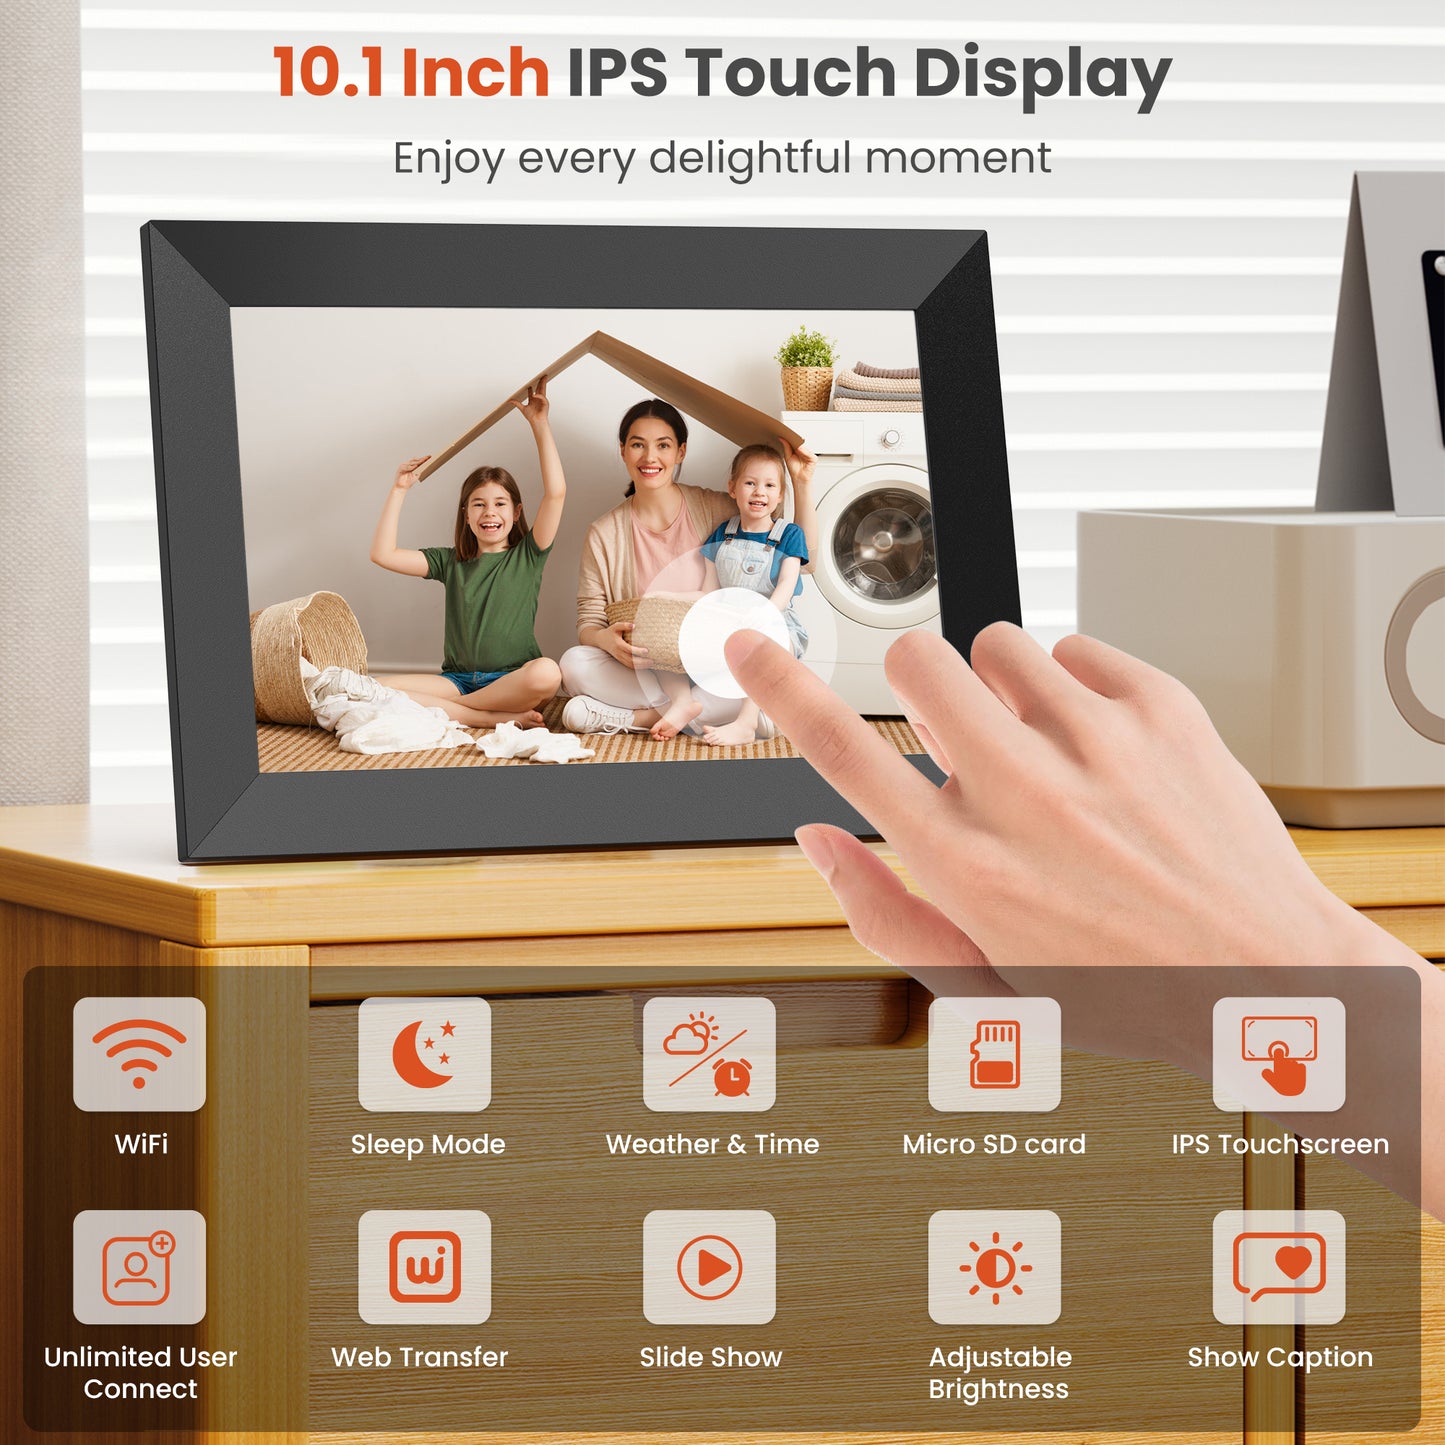 NUSICAN 10.1" WiFi Digital Picture Frame 2 Pack, IPS HD Smart Touch Screen Cloud Electric Photo Frame with 32GB Storage, SlideShow, Auto-Rotate, Share Photos & Videos instantly, Best Gift choices!